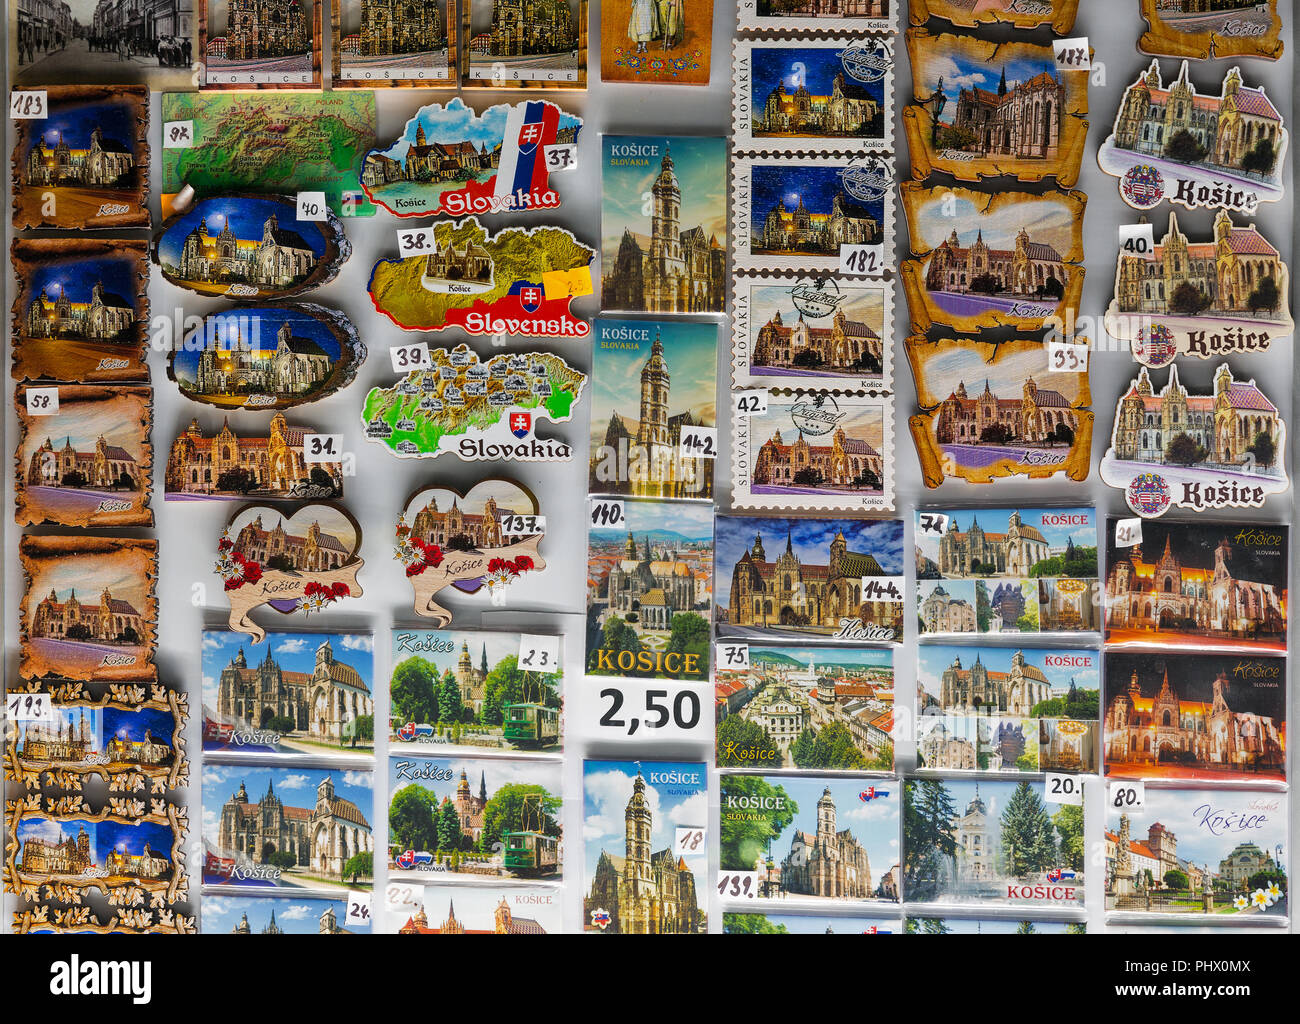 Set of souvenir refrigerator magnets with price tags closeup in Kosice, Slovakia. Stock Photo